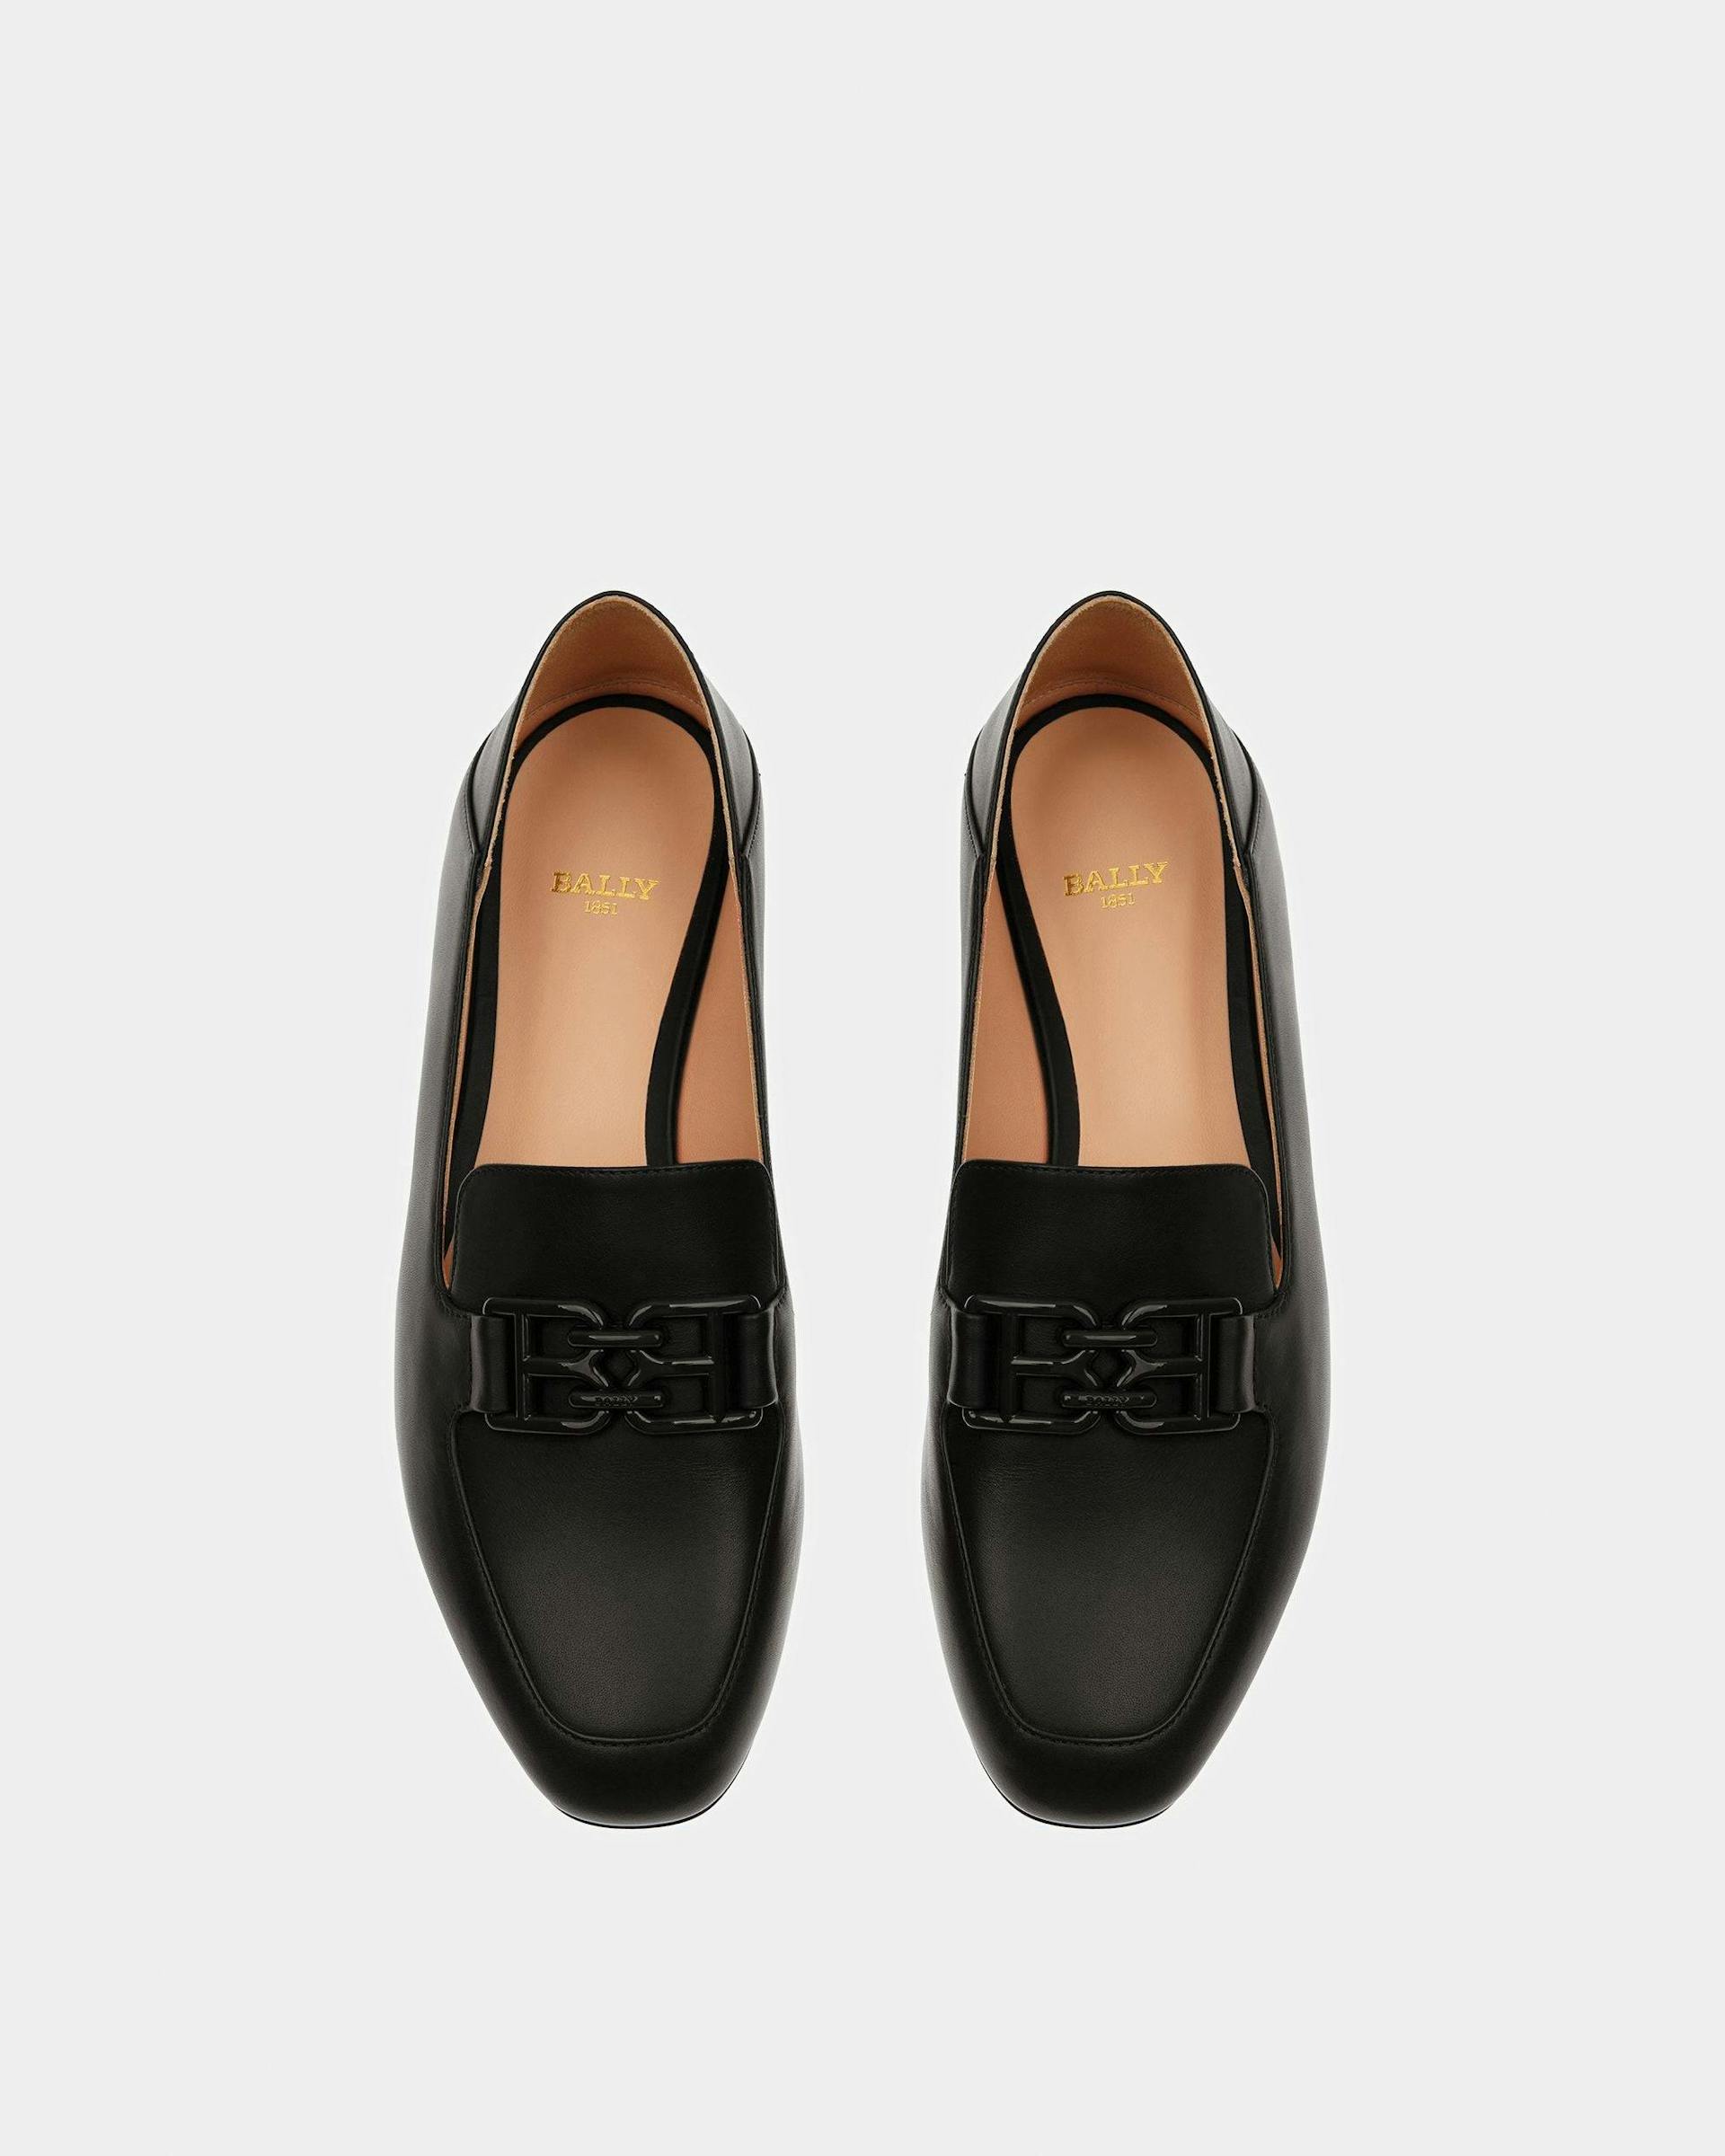 Ellah Leather Loafers In Black - Women's - Bally - 02